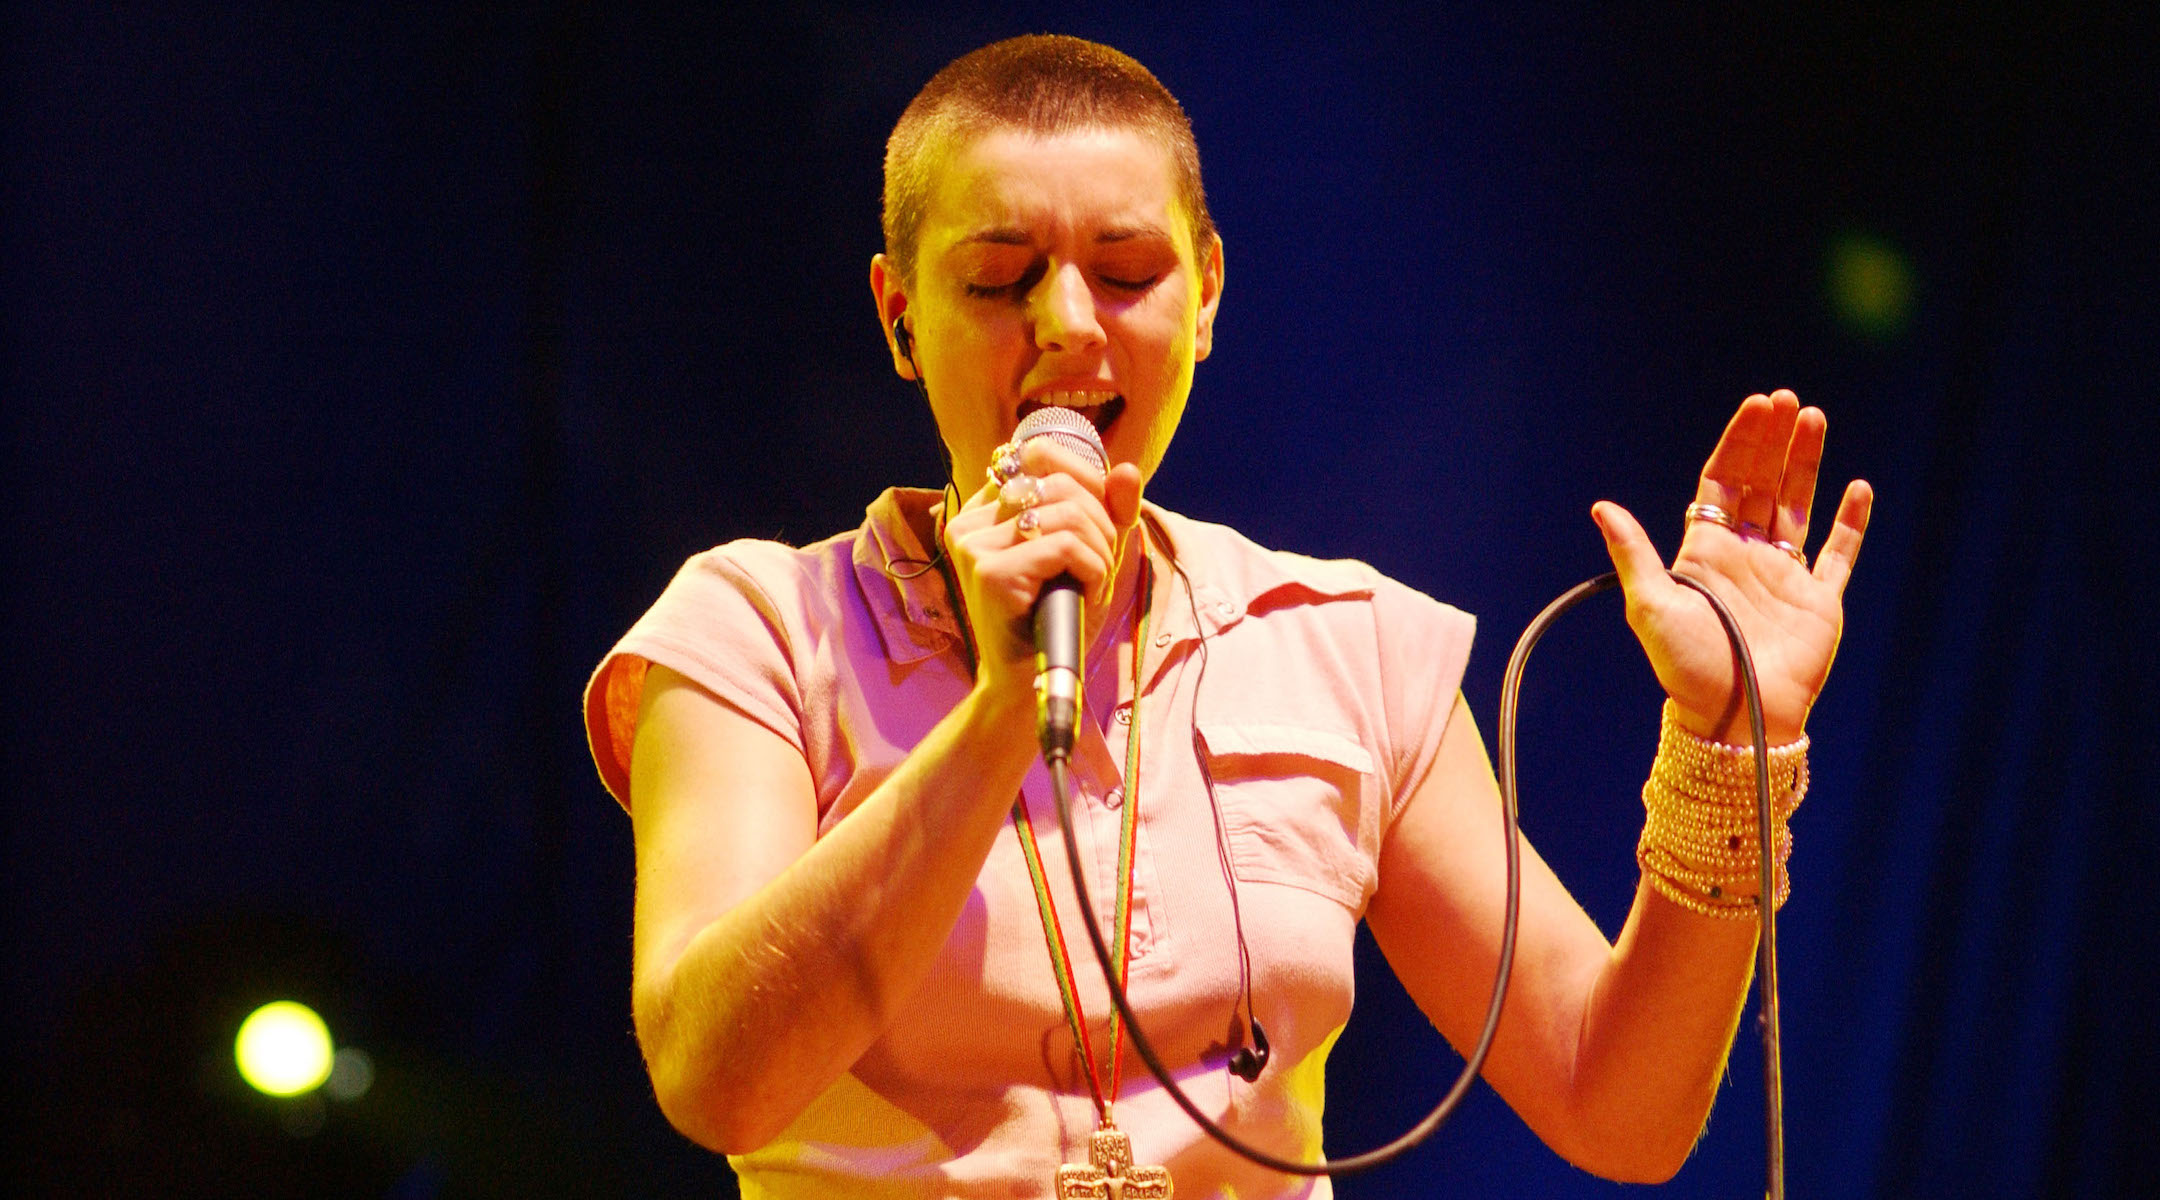 Irish singer Sinead O’Connor sings in concert January 18, 2003 at The Point Theatre in Dublin, Ireland. (Getty Images)